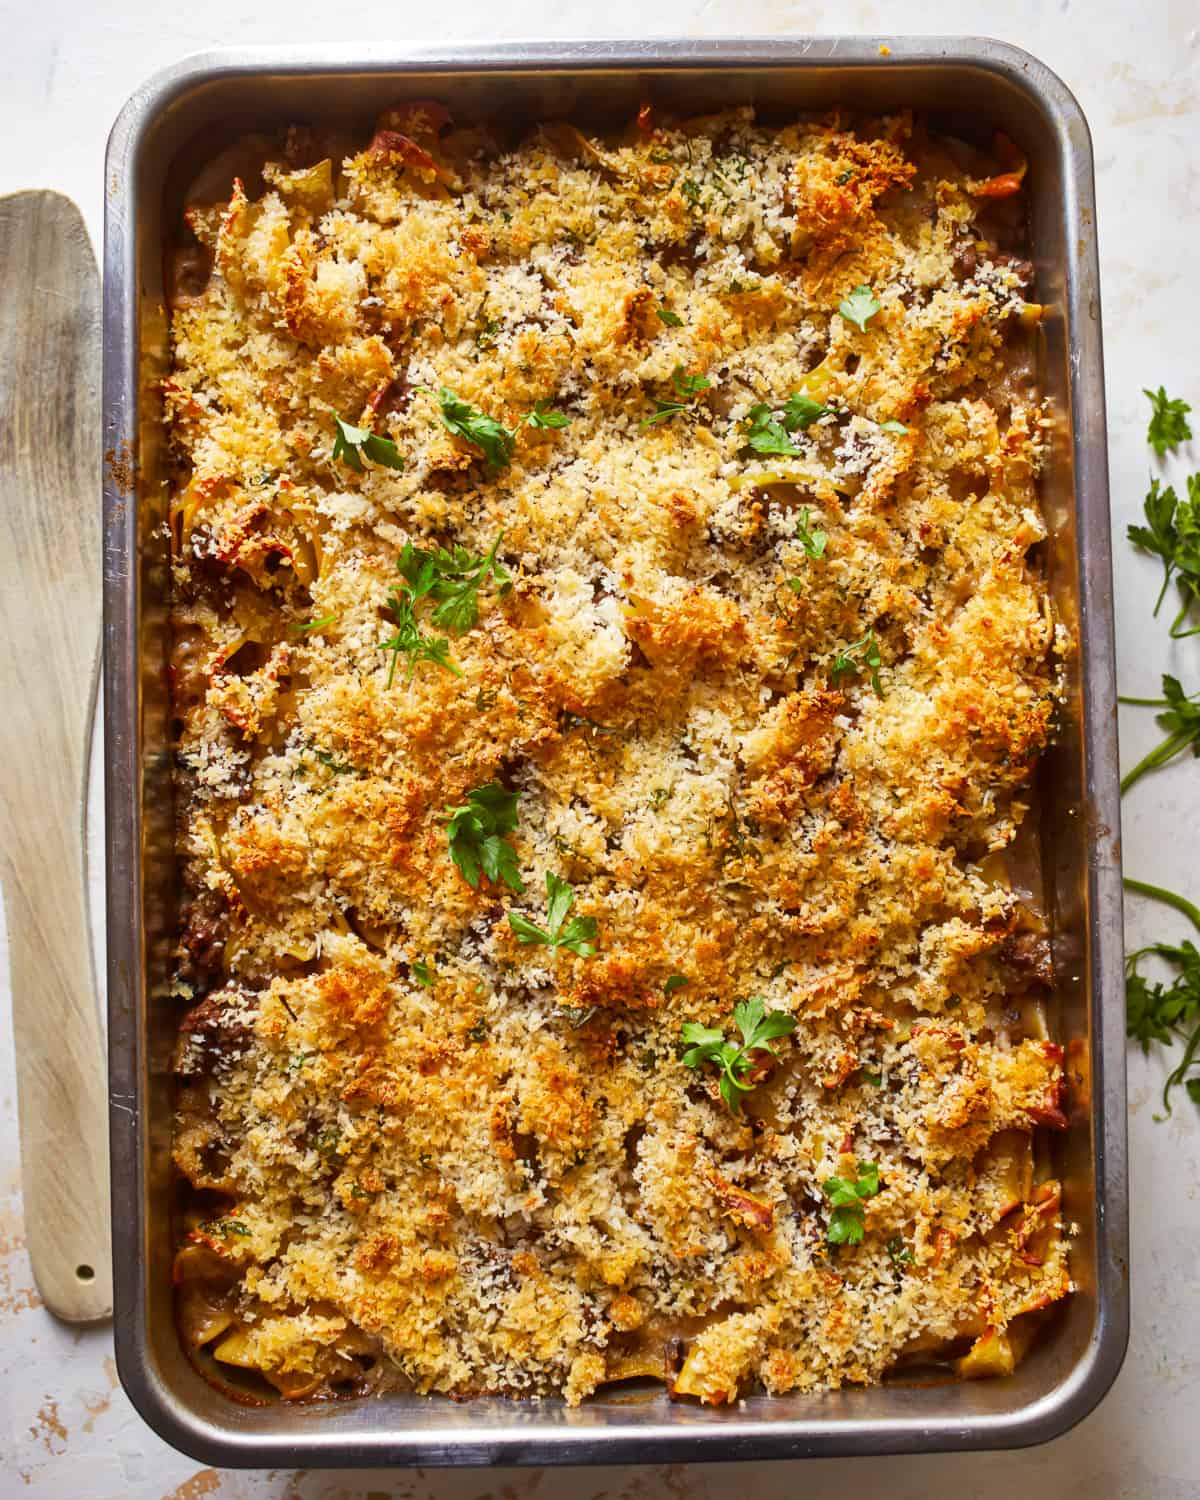 a baking dish filled with pasta and parmesan cheese.